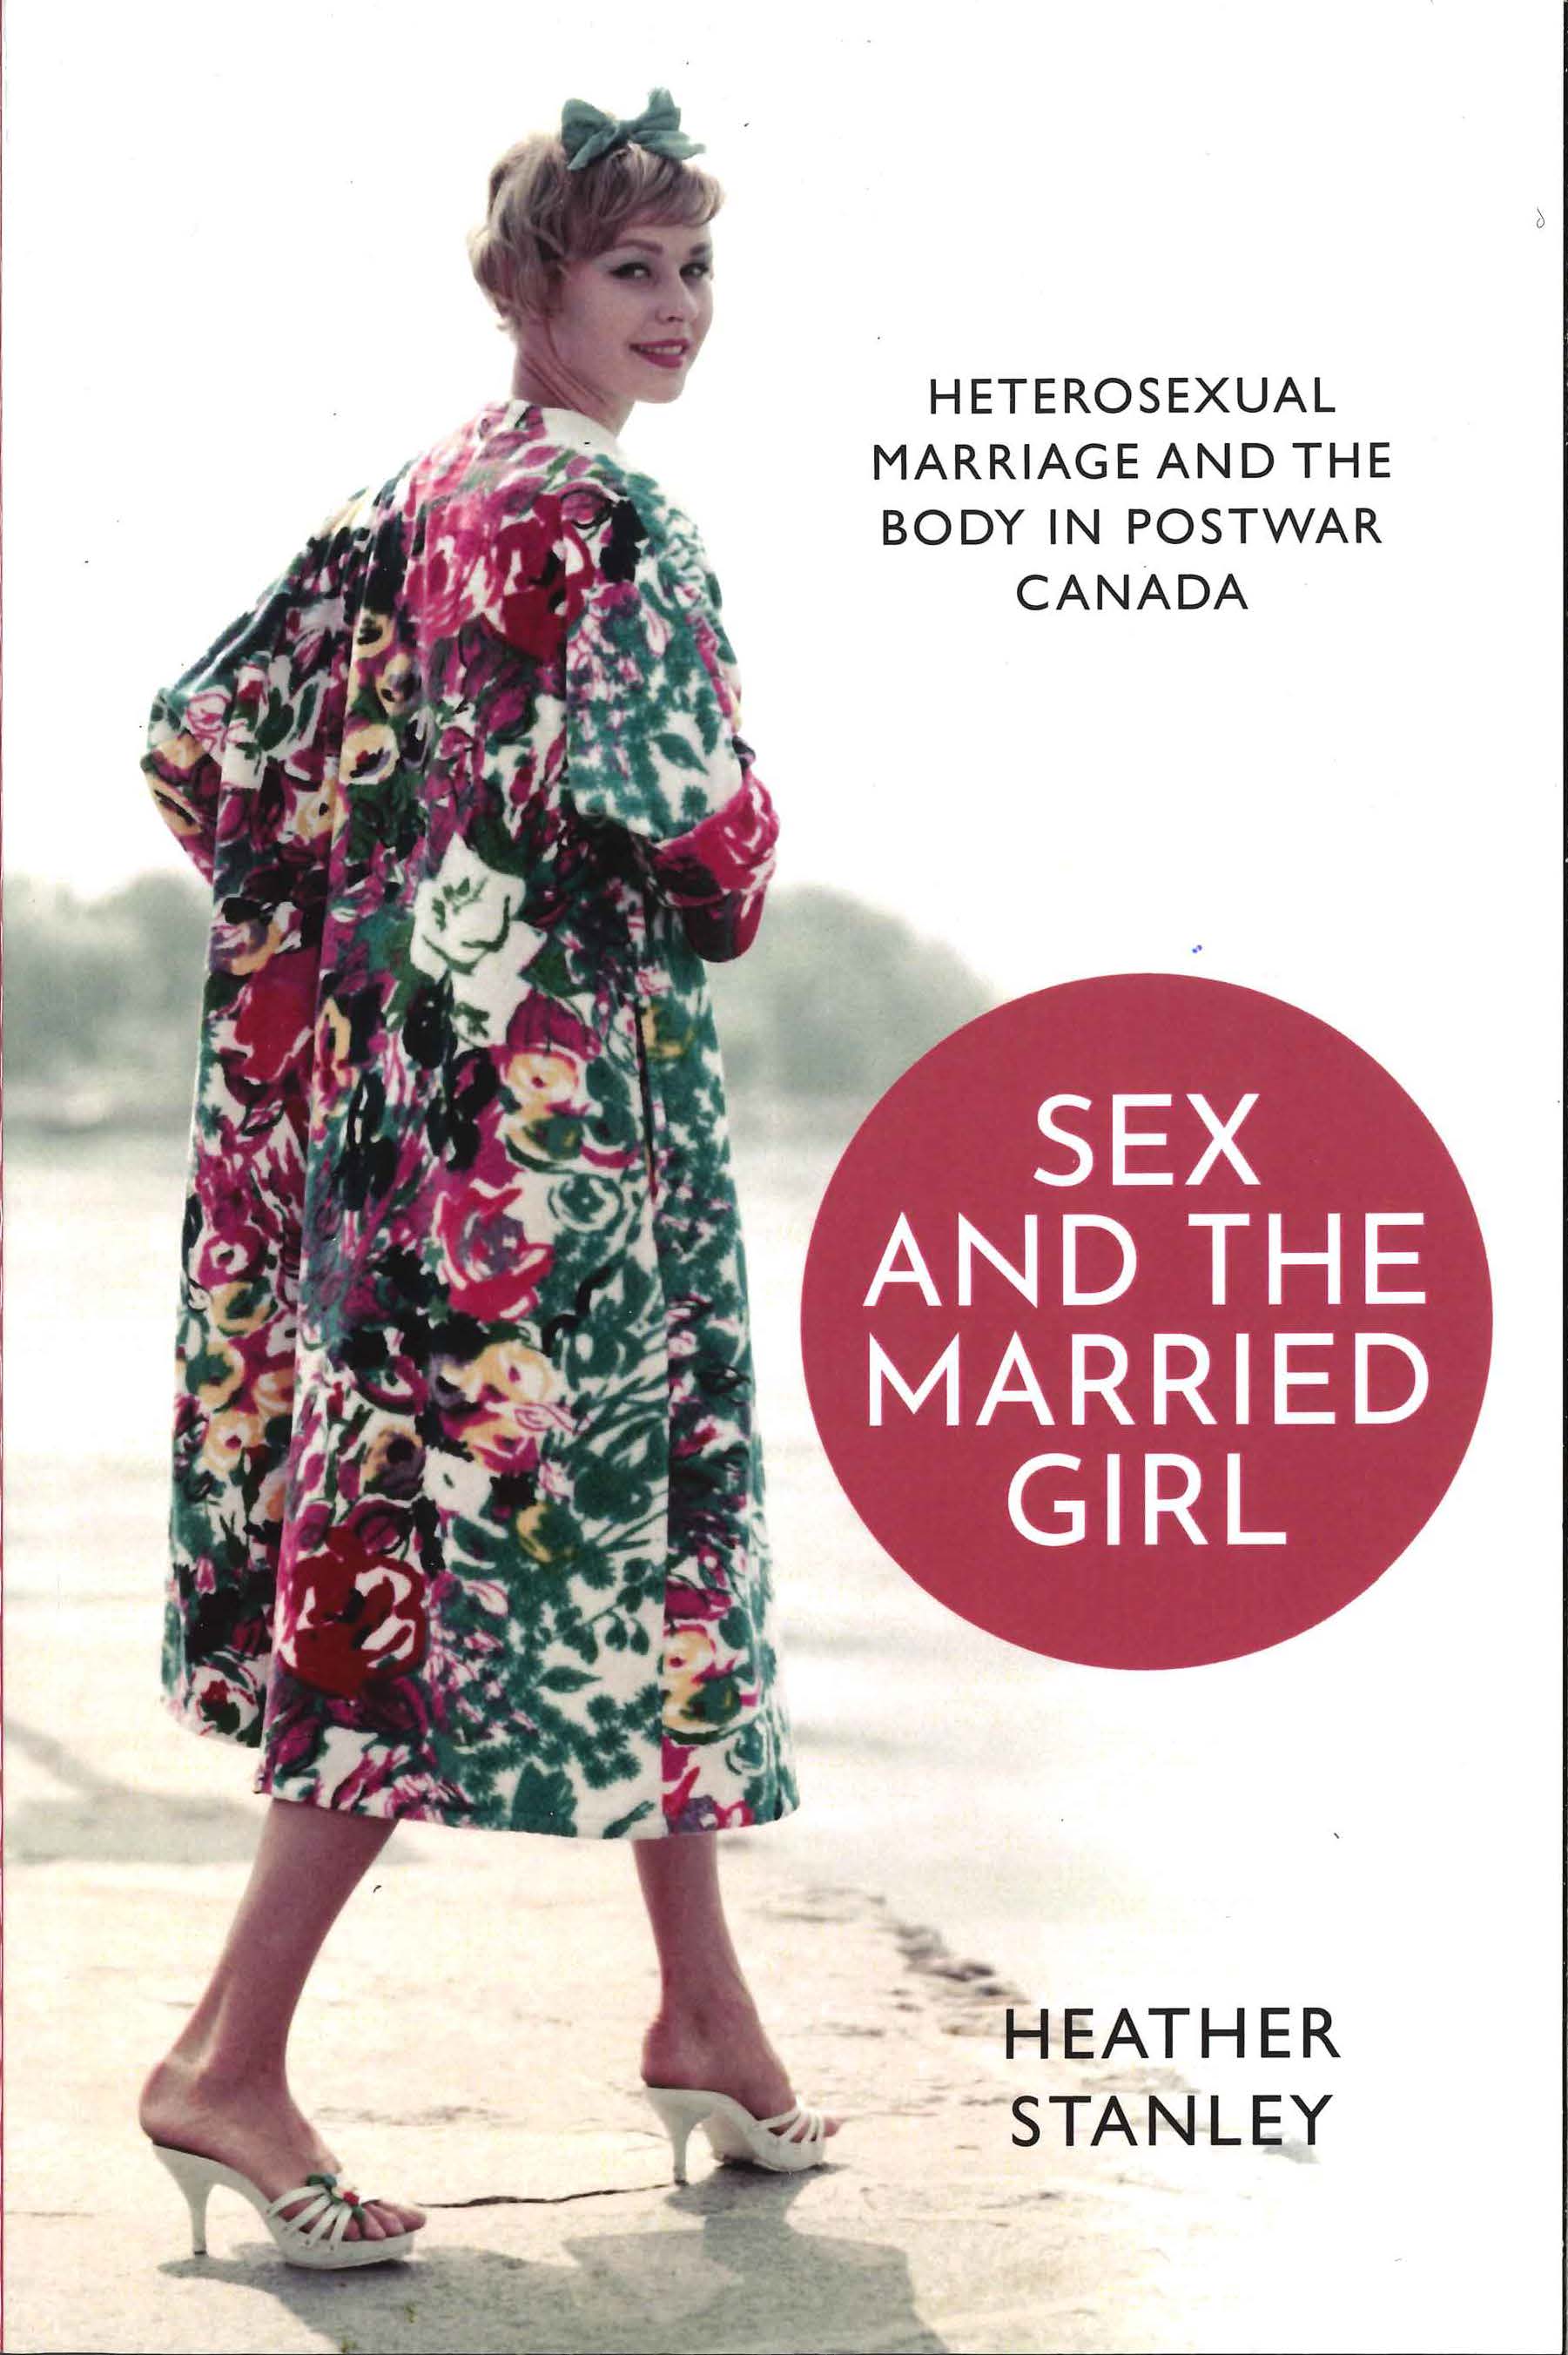 Sex and the Married Girl Heterosexual Marriage and the Body in Postwar Canada Notice Board